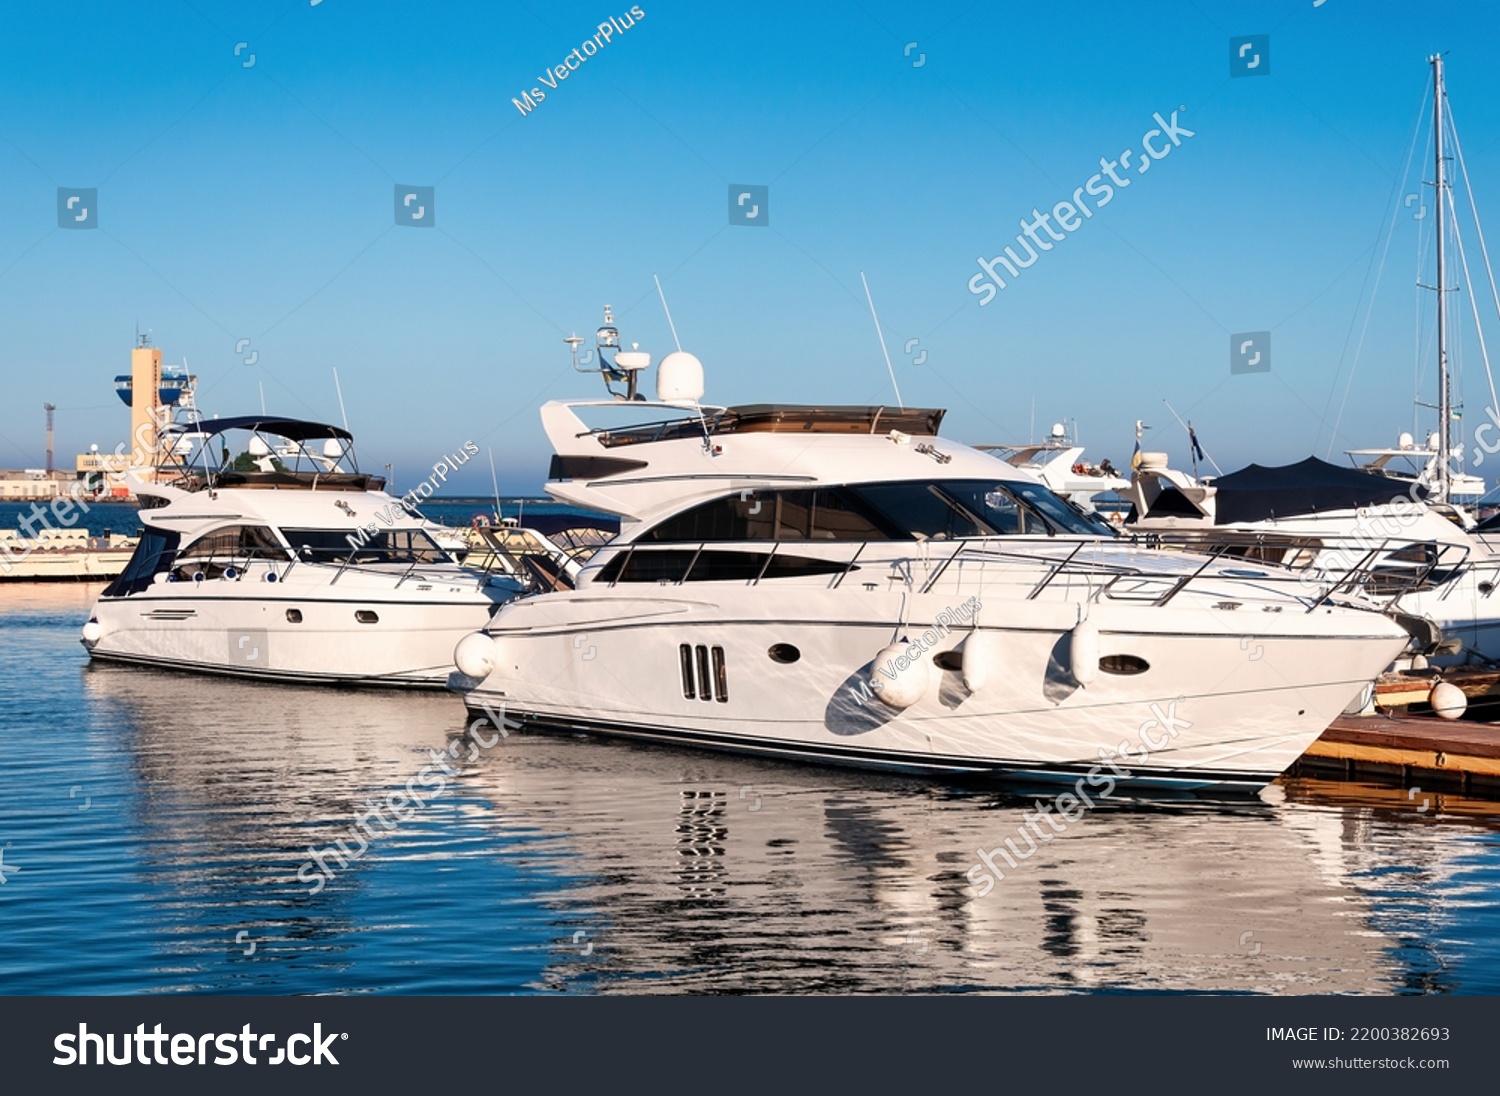 Bodrum Cruise Port southwestern Aegean sea harbor. A stunning view of sailing yachts in Port. Yachts in sunset bay. Sailing boats sunset scene. Sunset yachts view. Yachts in sunset bay. #2200382693